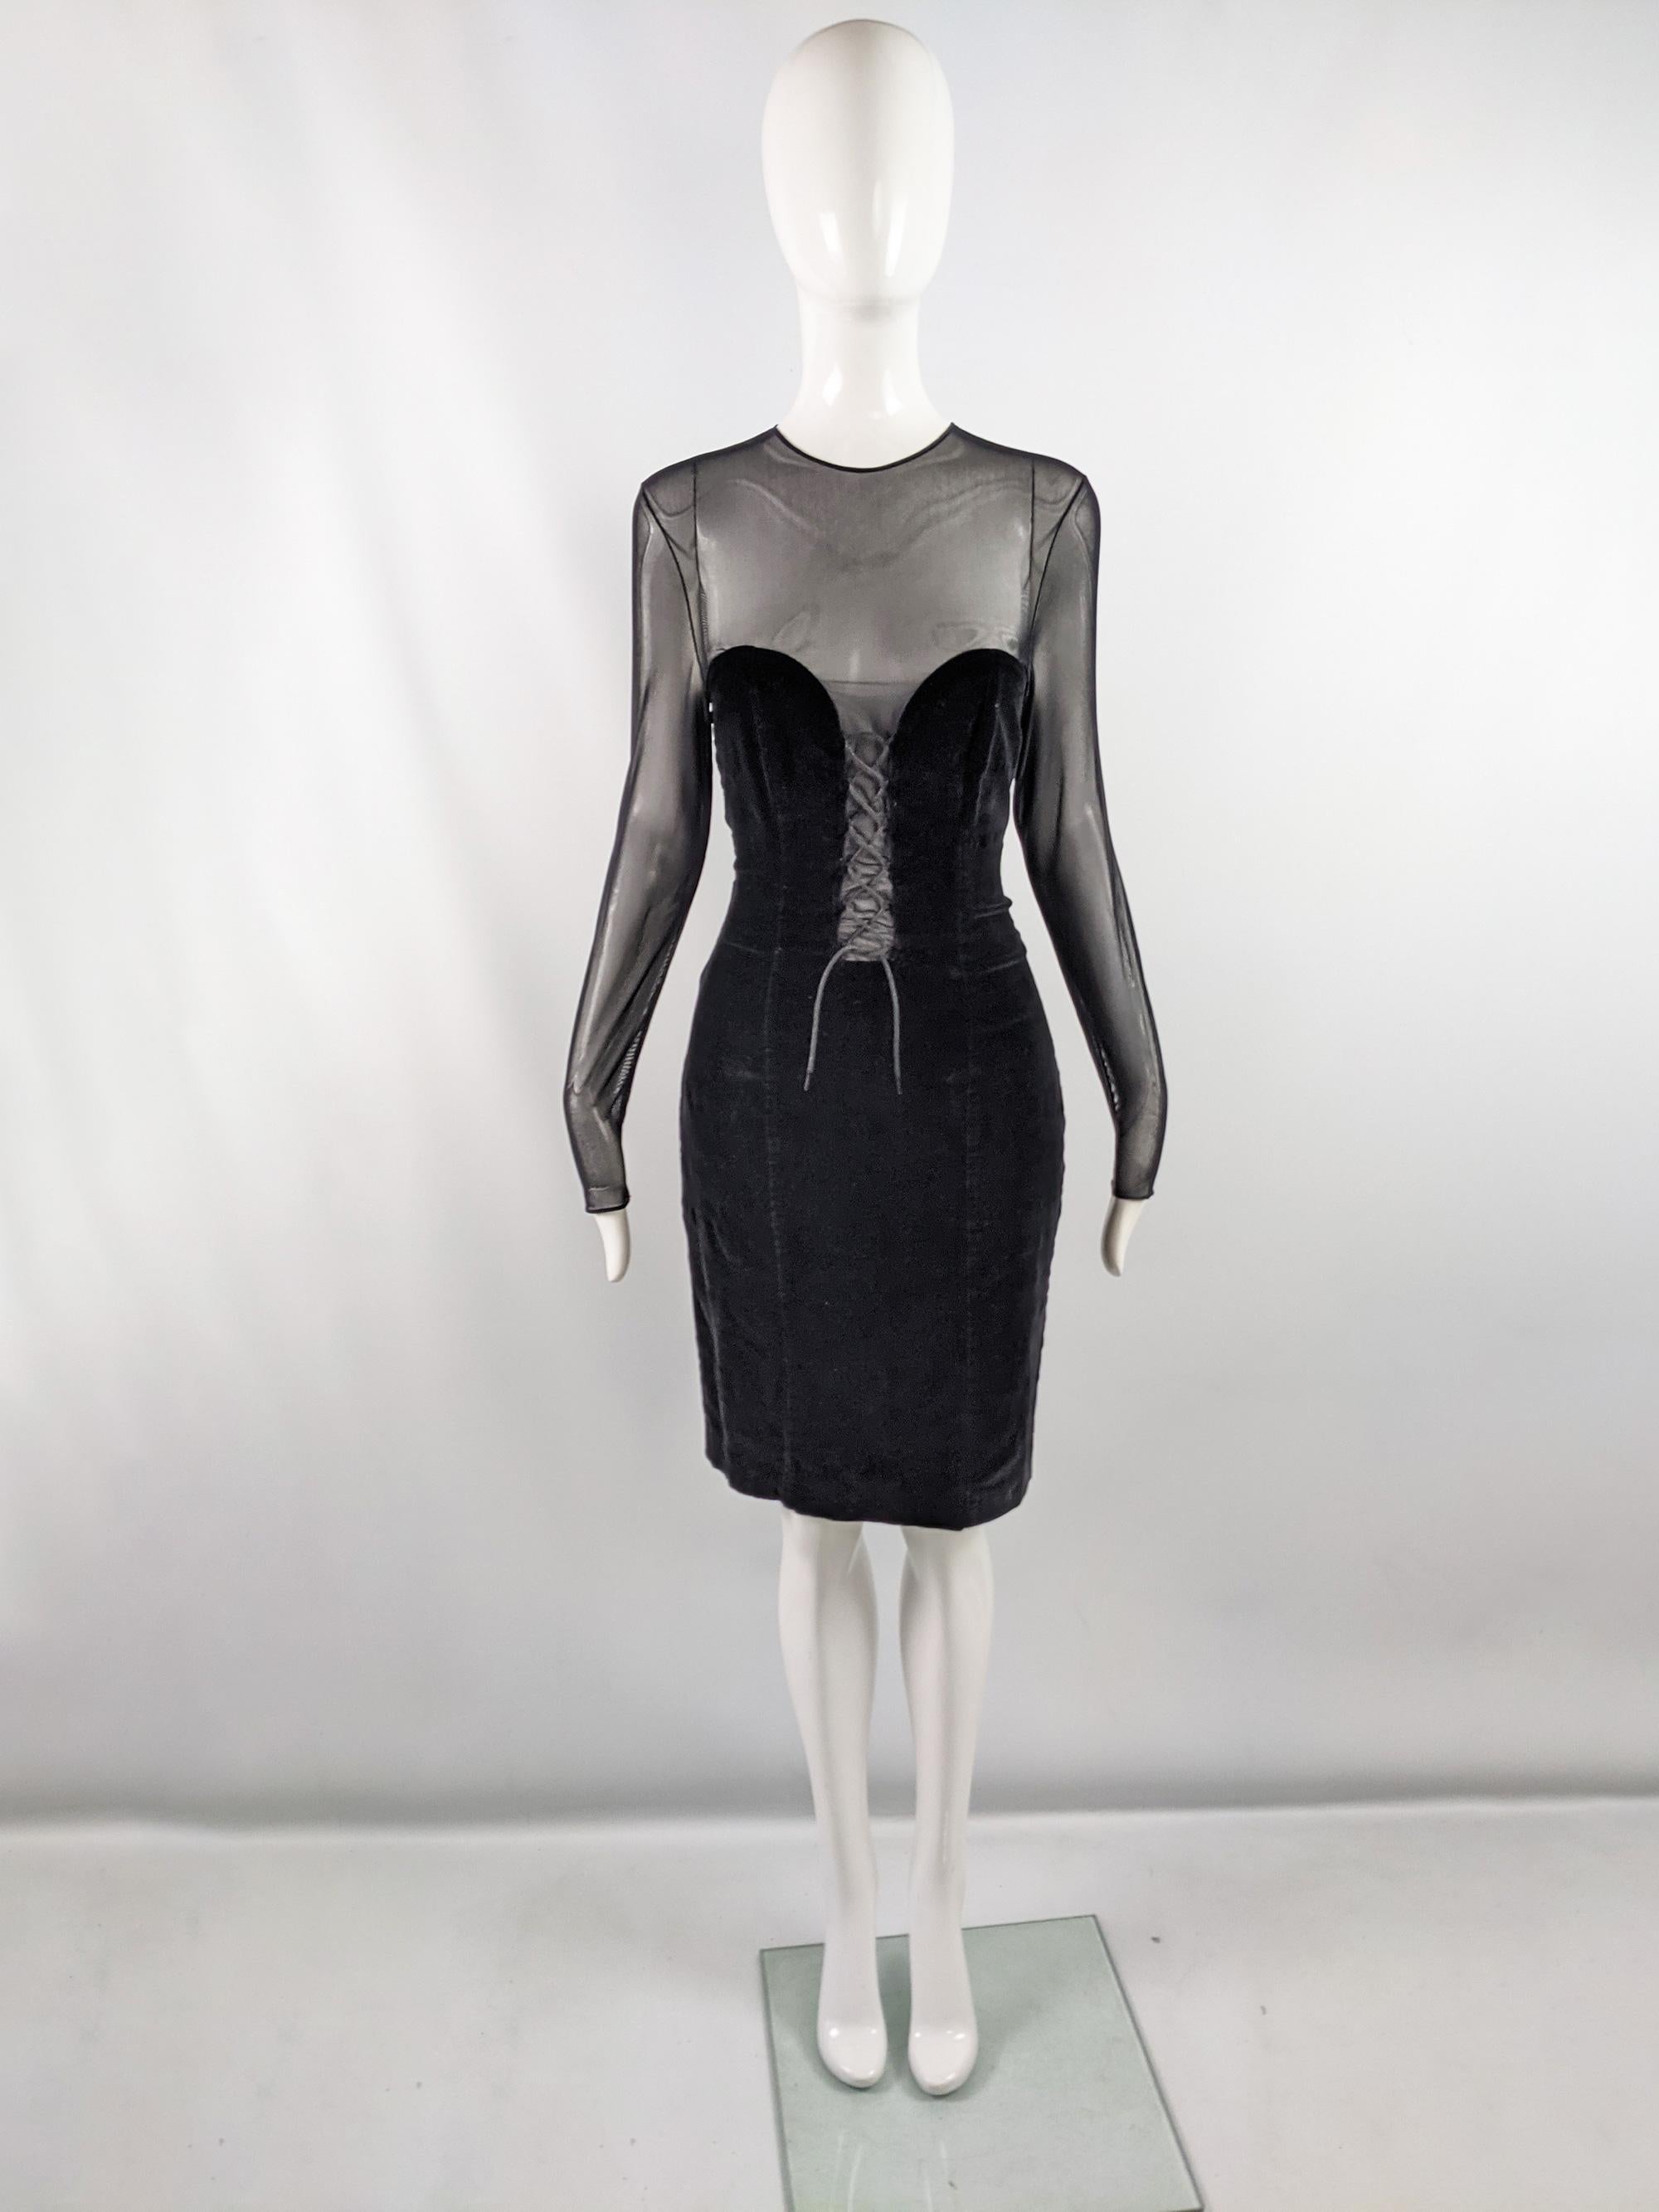 An ultra sexy vintage womens long sleeve party dress from the 90s by luxury French designer, Jiki of Monte Carlo. Made in France, in a black velvet fabric with a sheer mesh sleeves and cut out down the front for a super deep plunge neckline down to